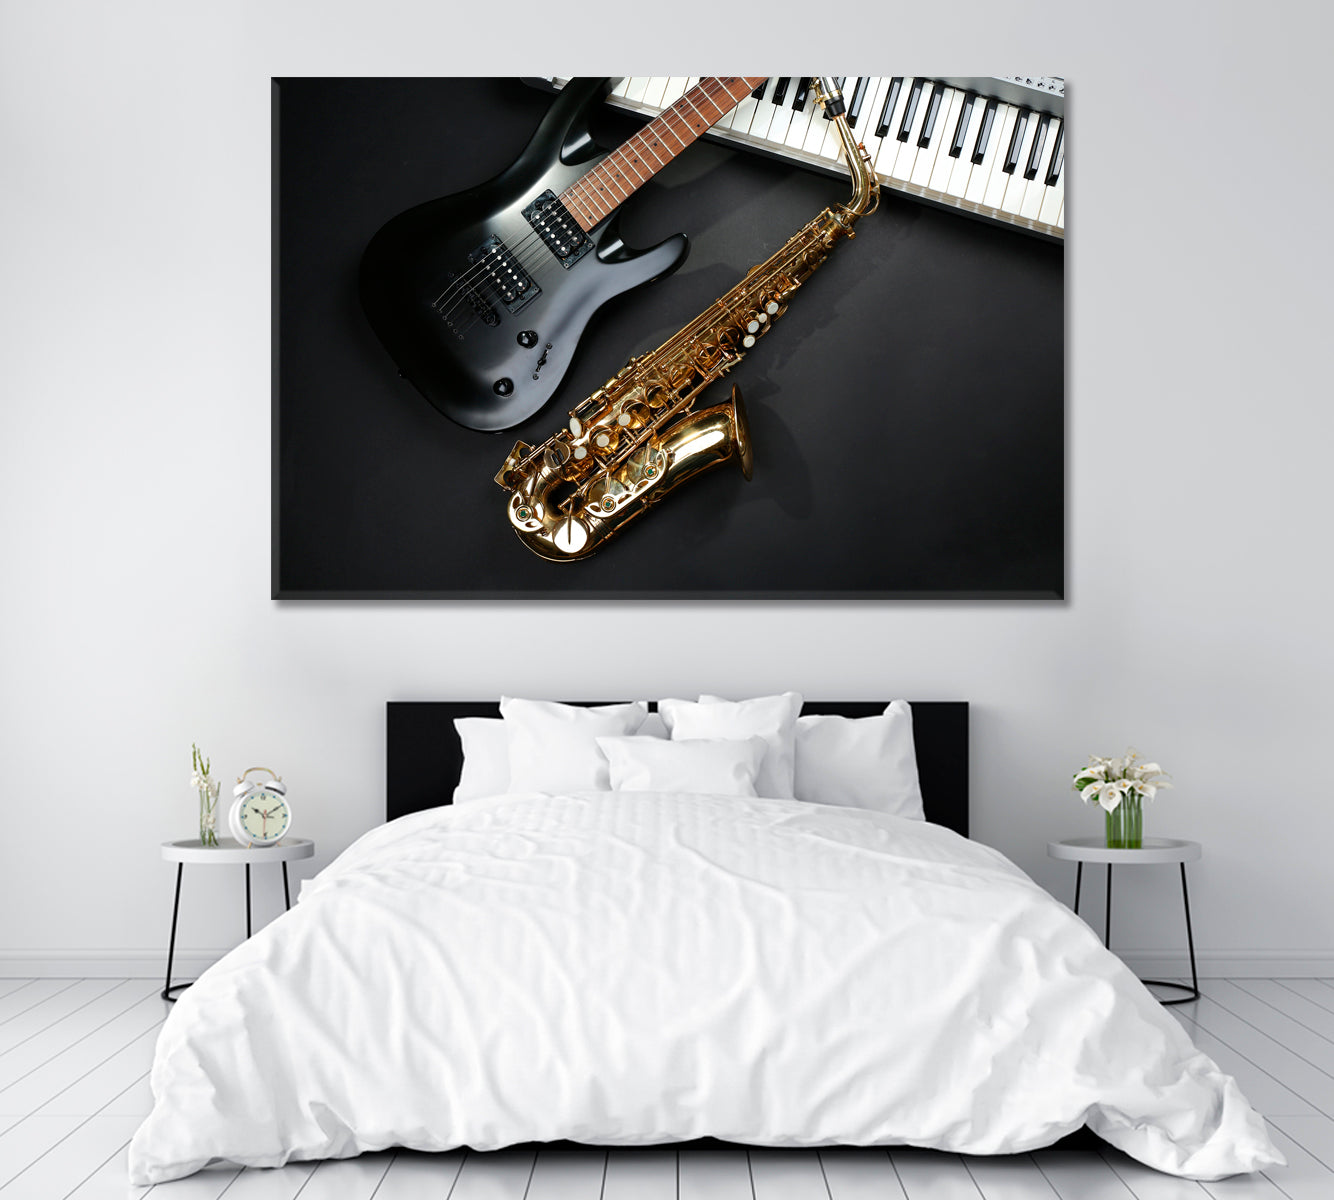 Saxophone and Electric Guitar Canvas Print ArtLexy 1 Panel 24"x16" inches 